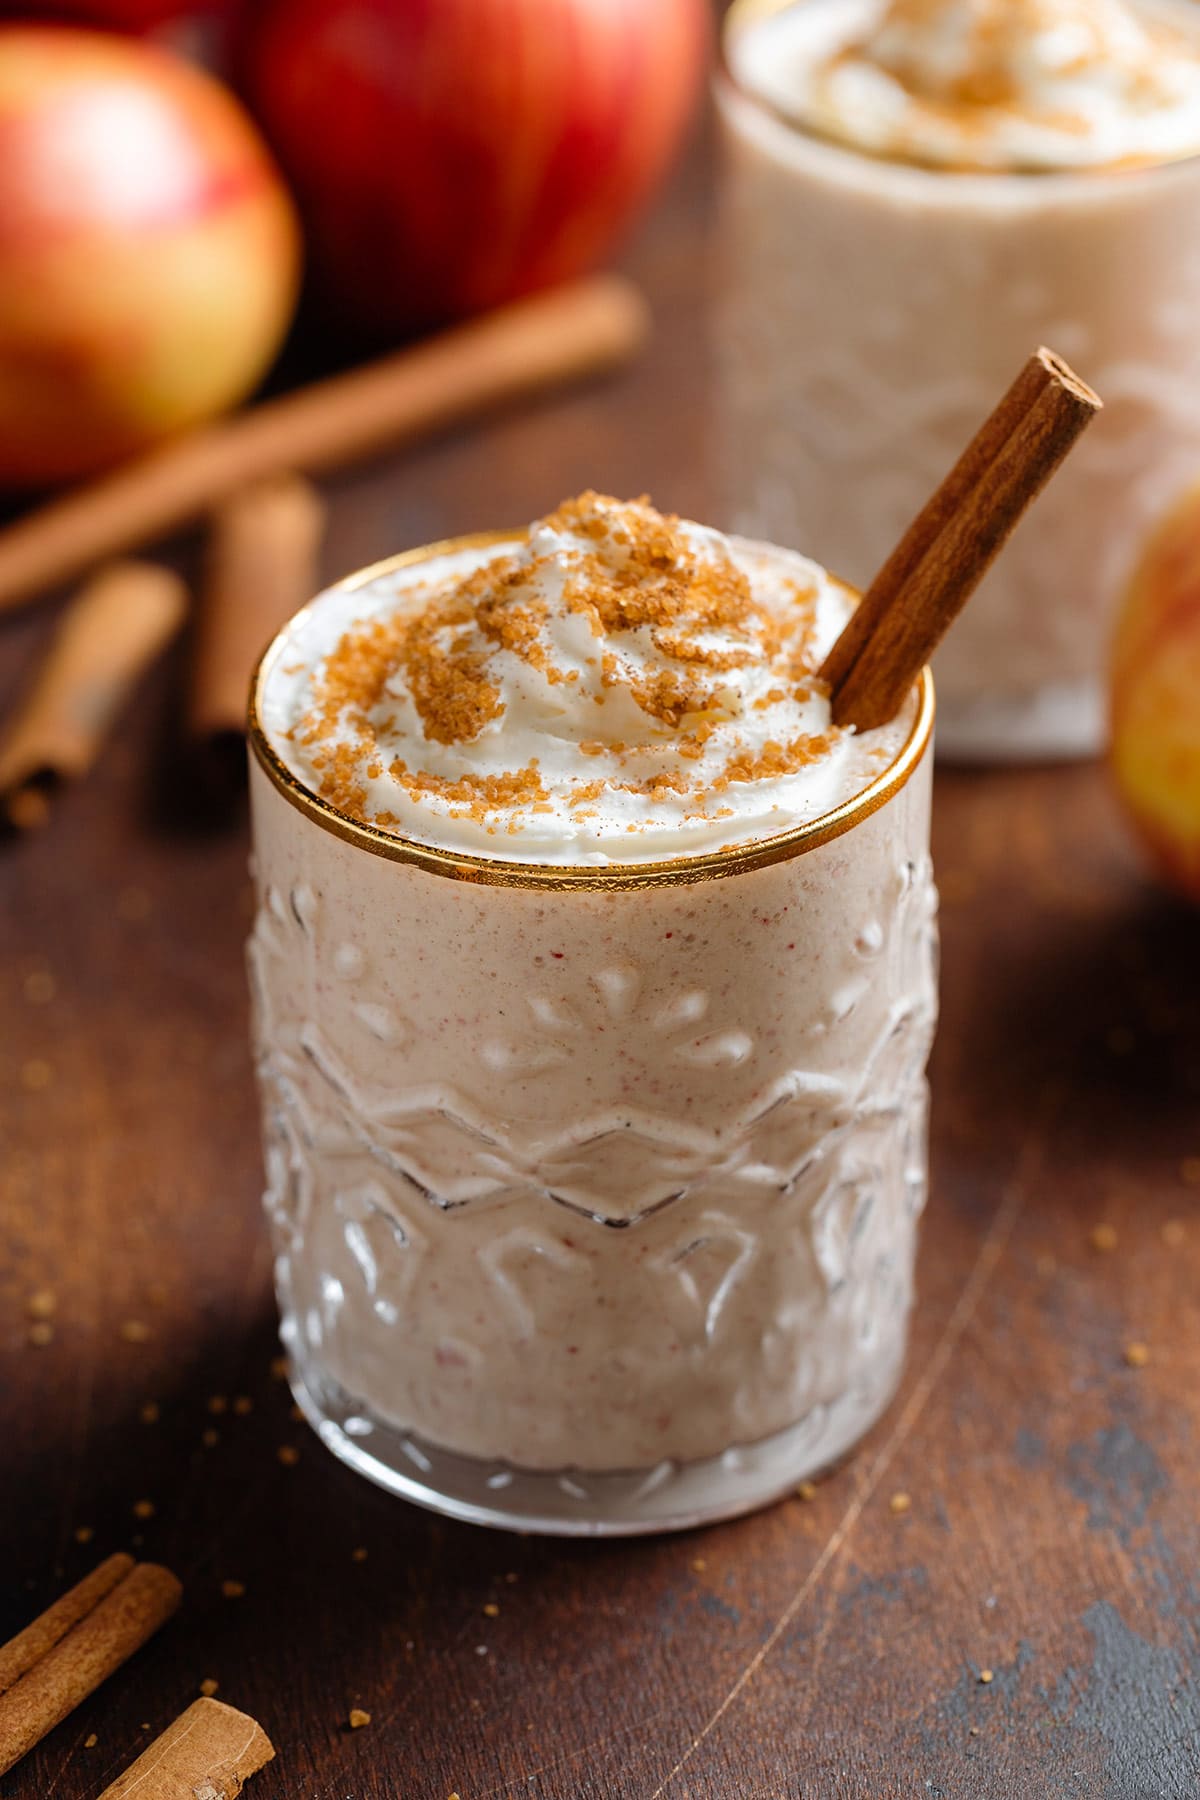 Apple pie smoothie with whipped cream and spiced sugar on top in a short glass with a gold rim garnished with a stick of cinnamon with apples in the background.